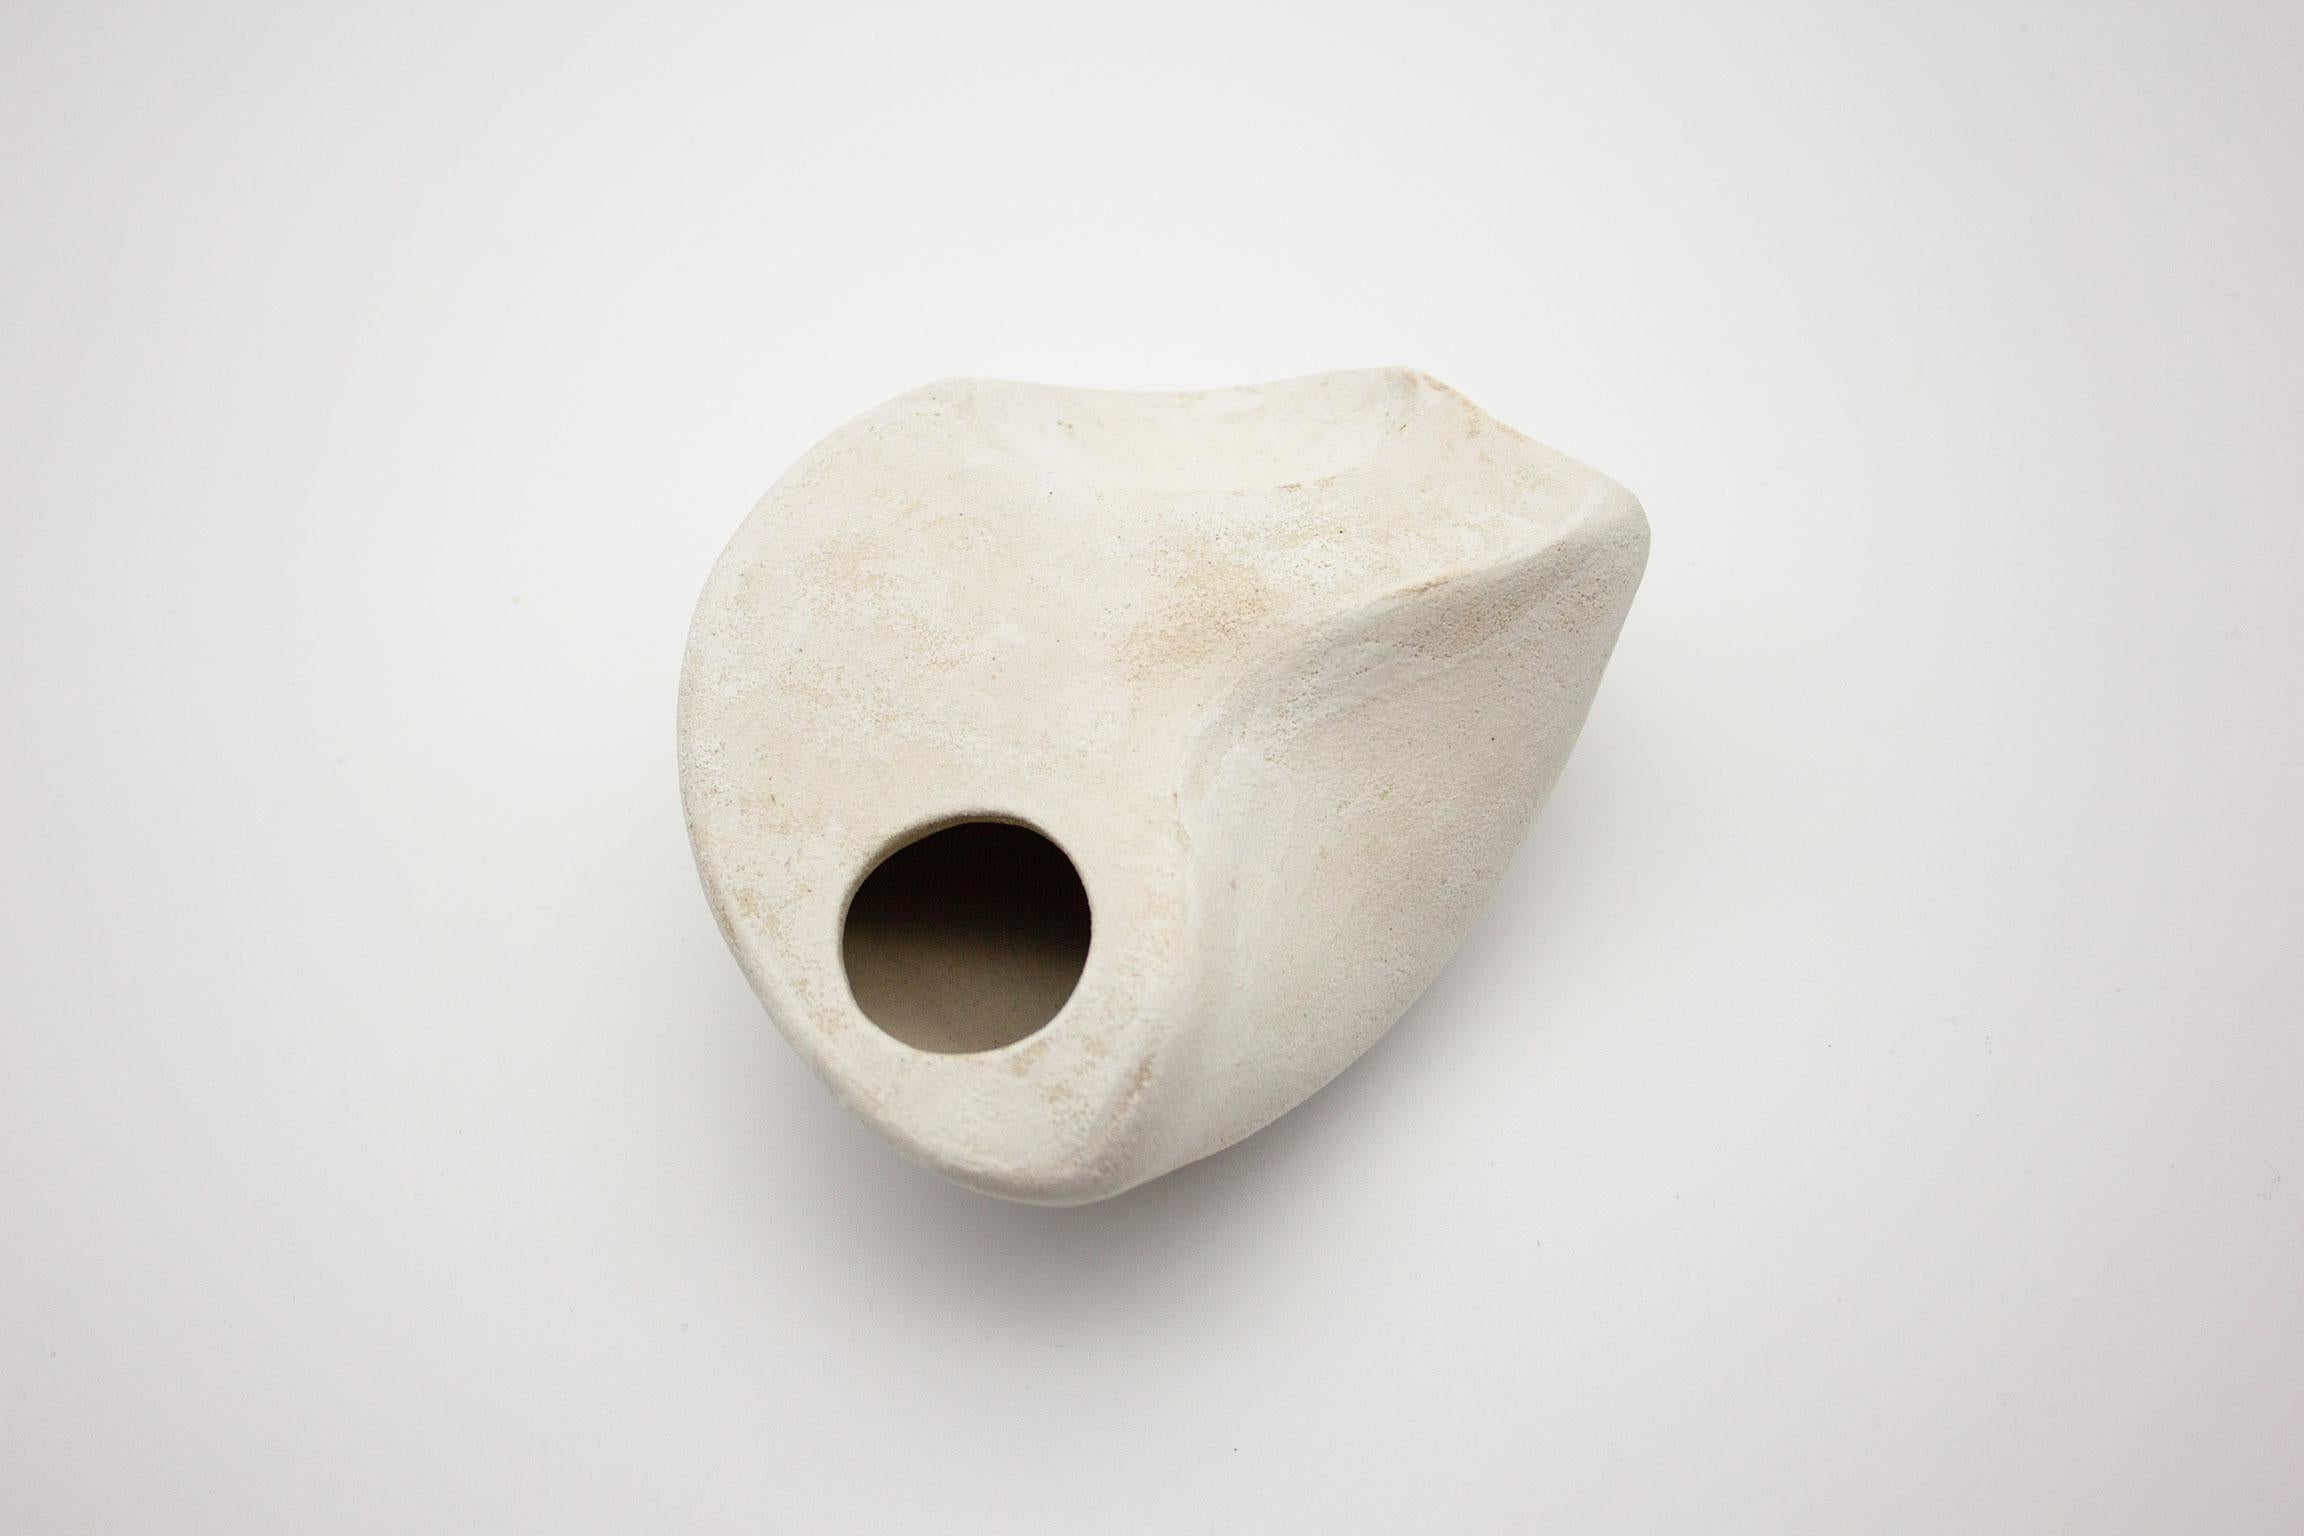 The small curved form with Hip and Plinth blurs the boundary between a functional vase and a sculptural object. Created as part of the soft, soft hard 2018 collection, this piece is an exploration into form and the relationship between the wheel and